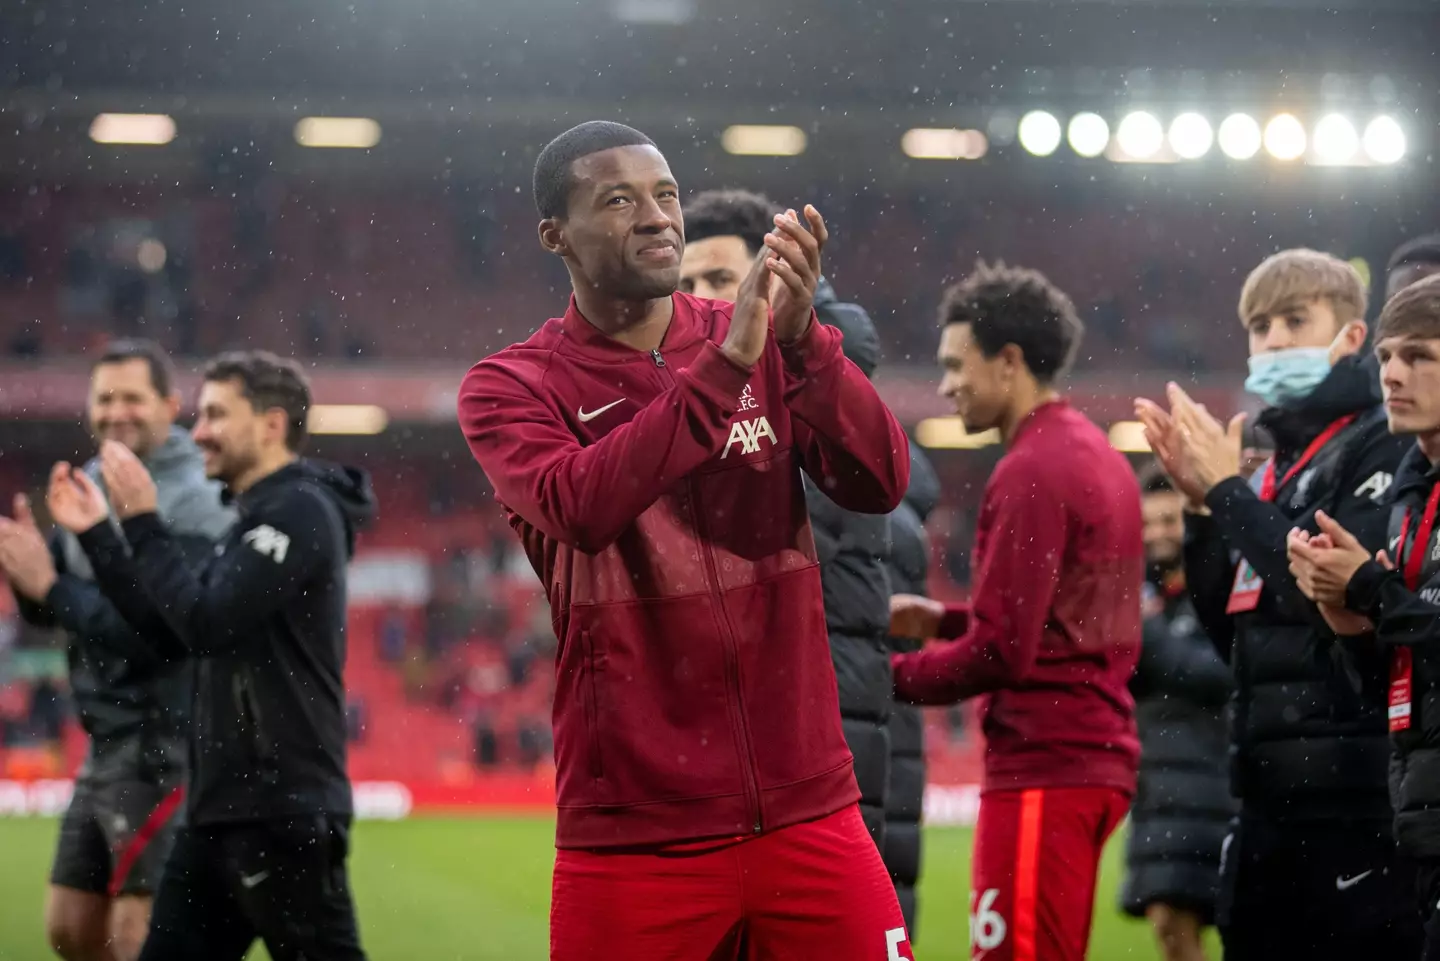 Wijnaldum left Liverpool in the summer after failing to agree a new deal (Image: Alamy)